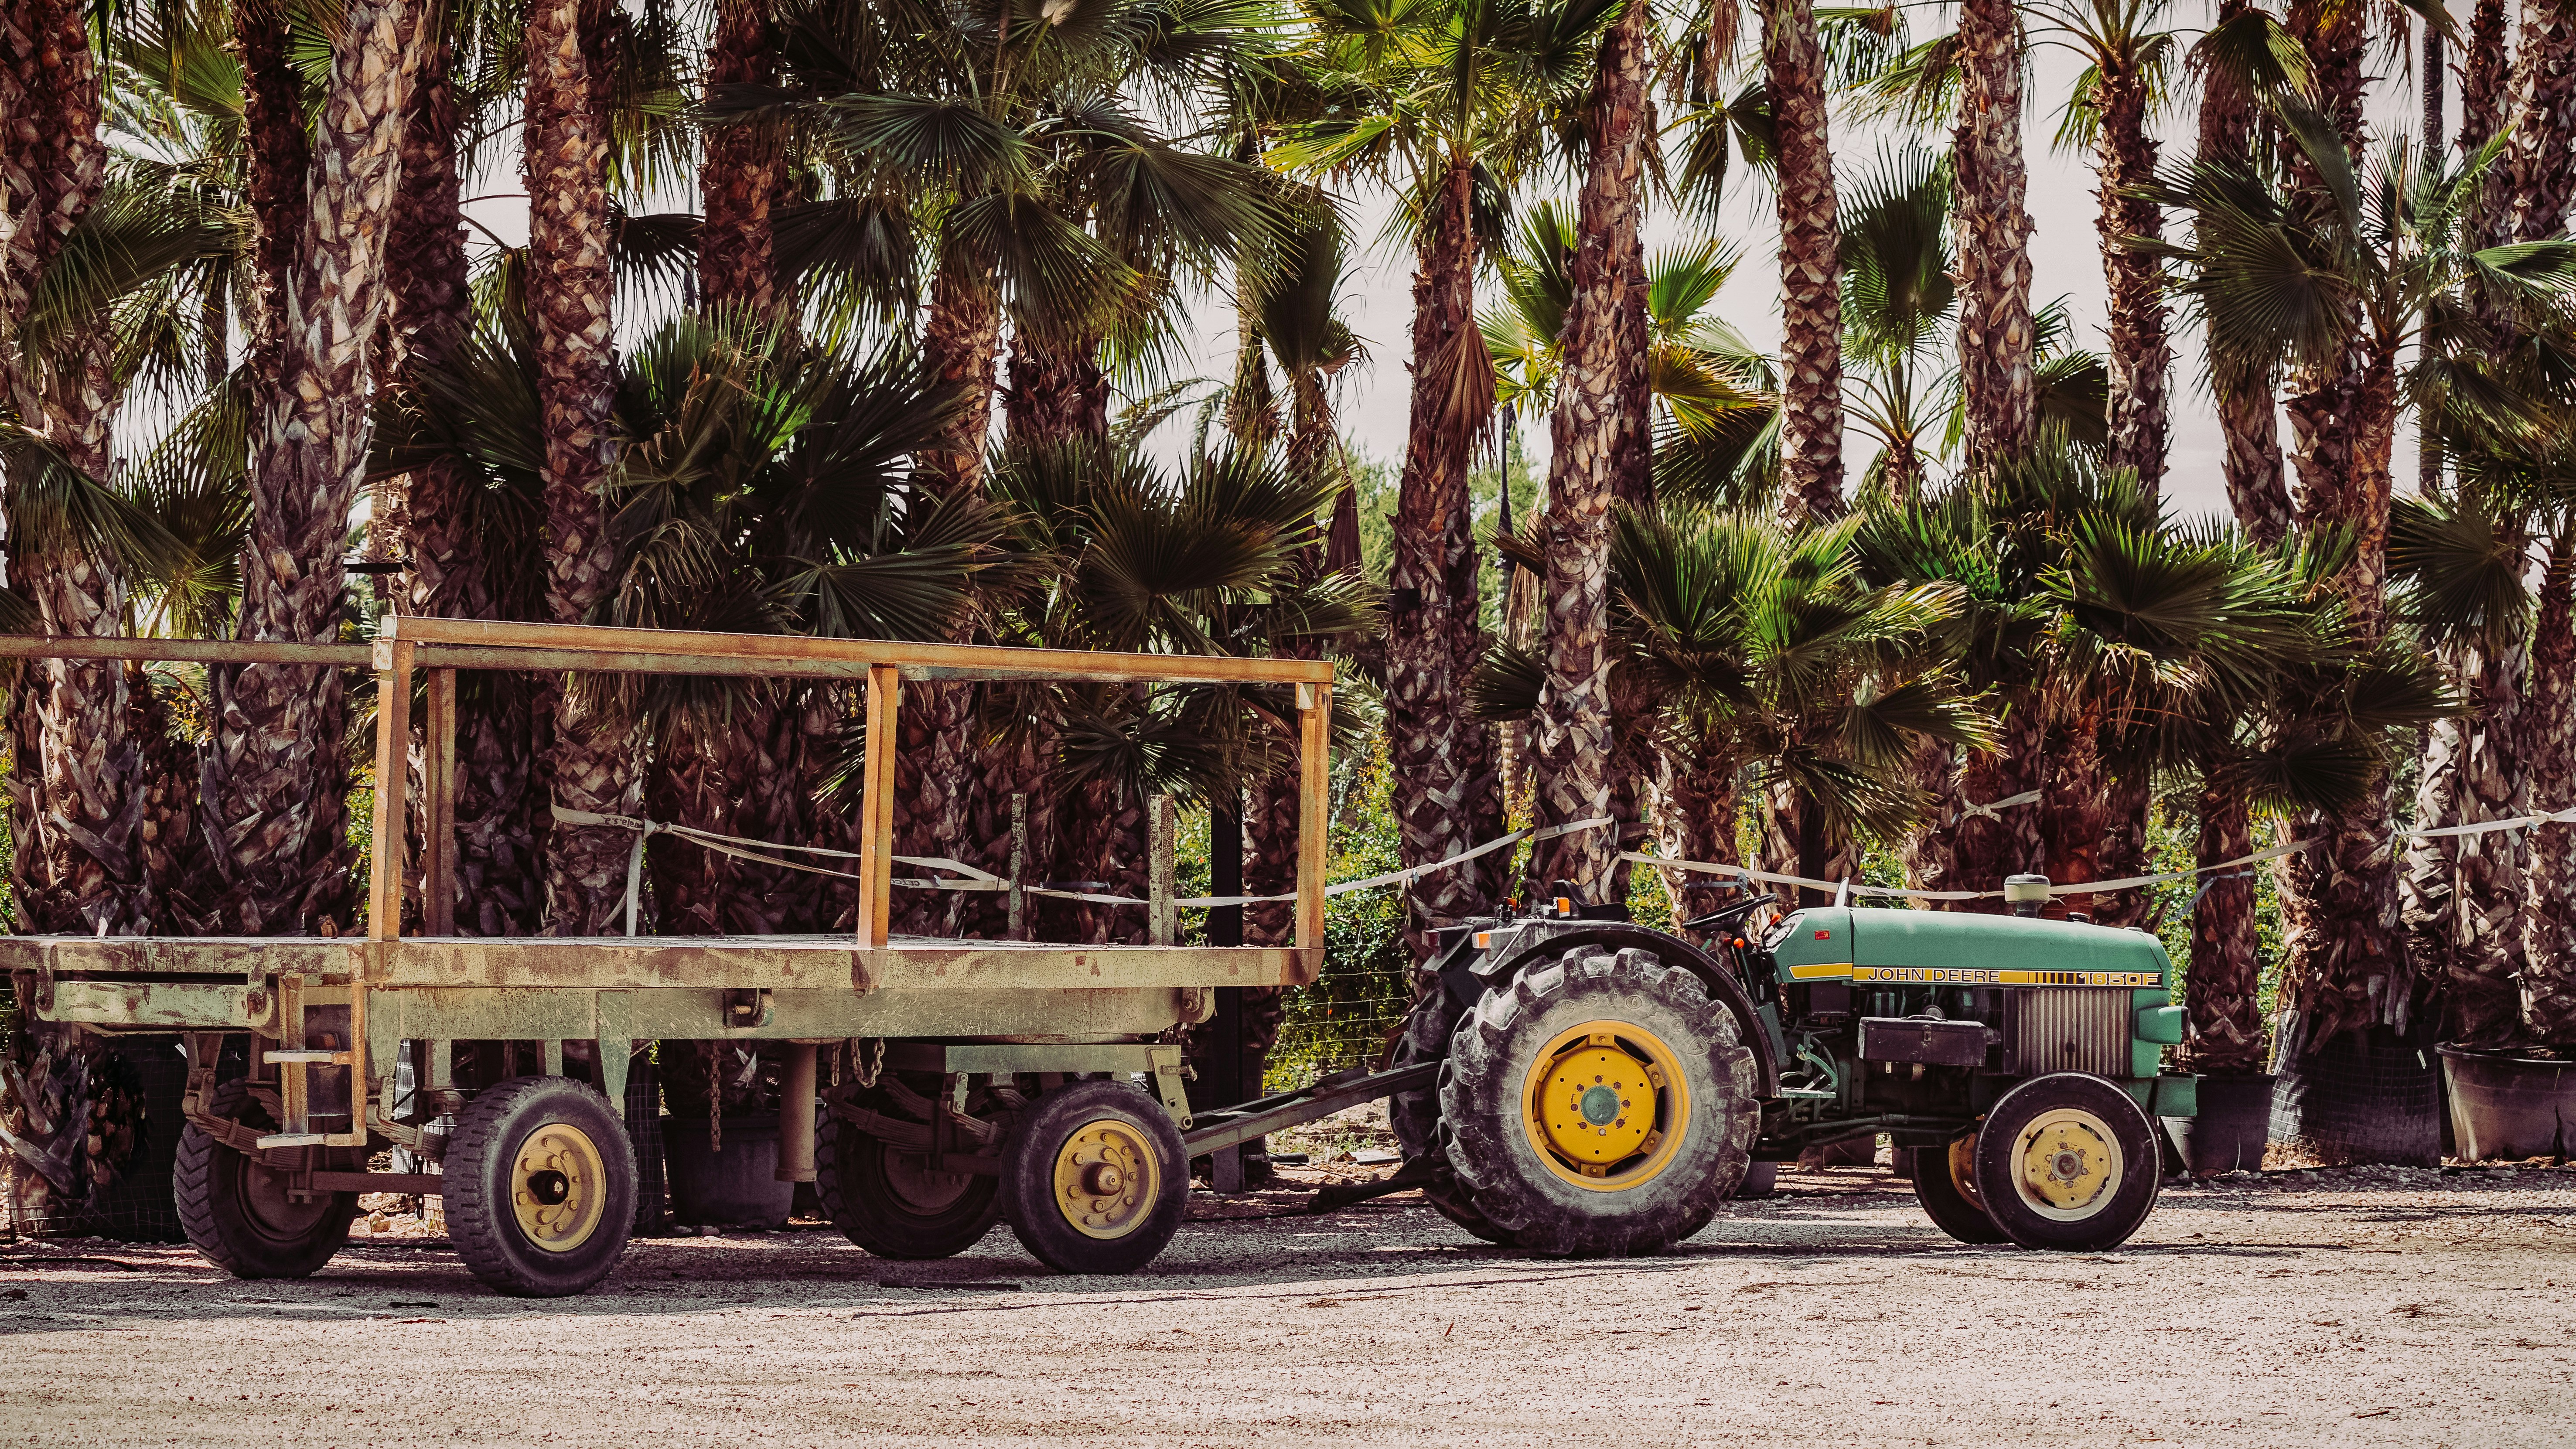 green and brown tractor near palm trees during daytime